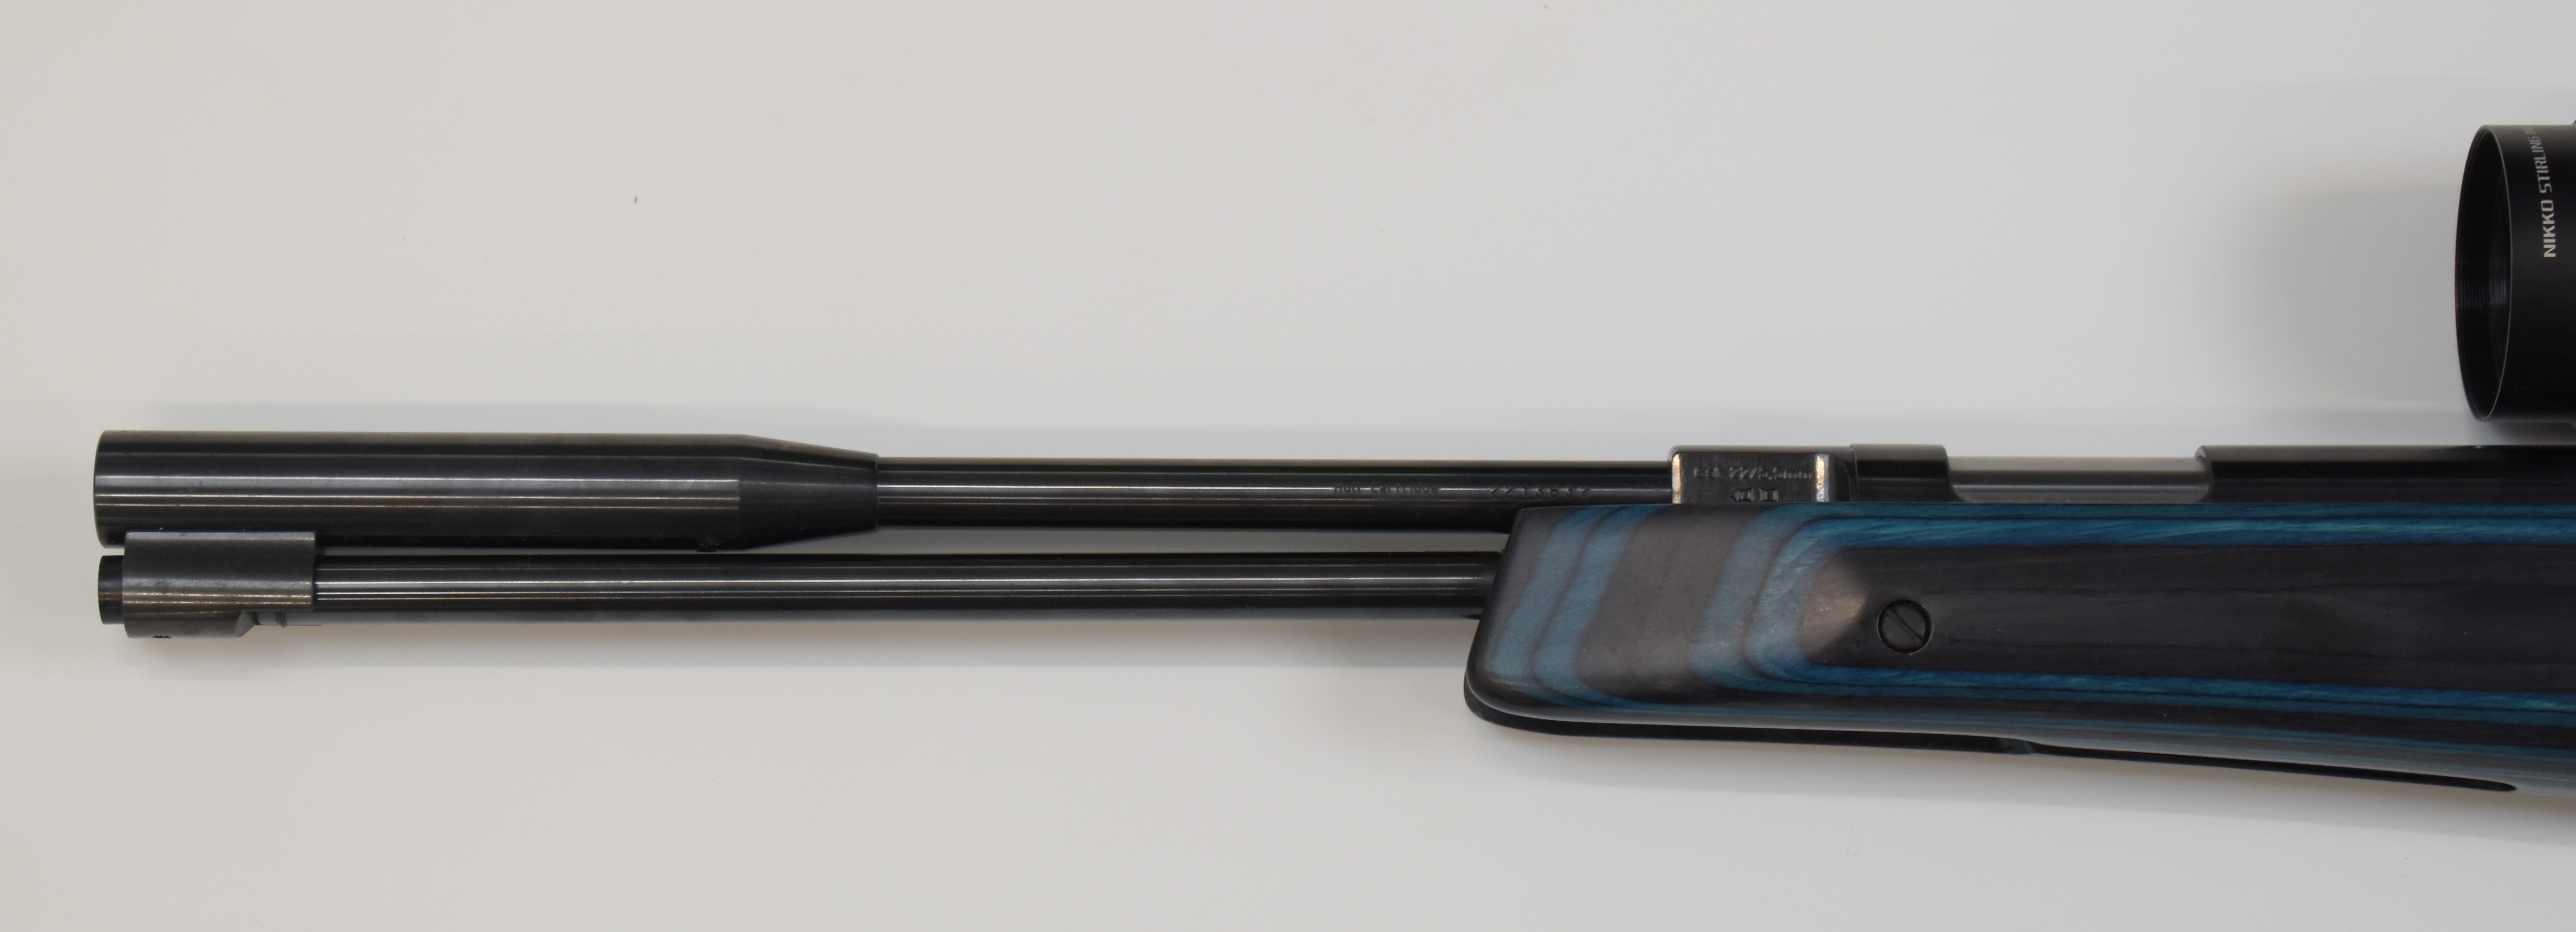 Weihrauch HW97K .22 underlever air rifle with blue laminated show wood stock, semi-pistol grip, - Image 9 of 10